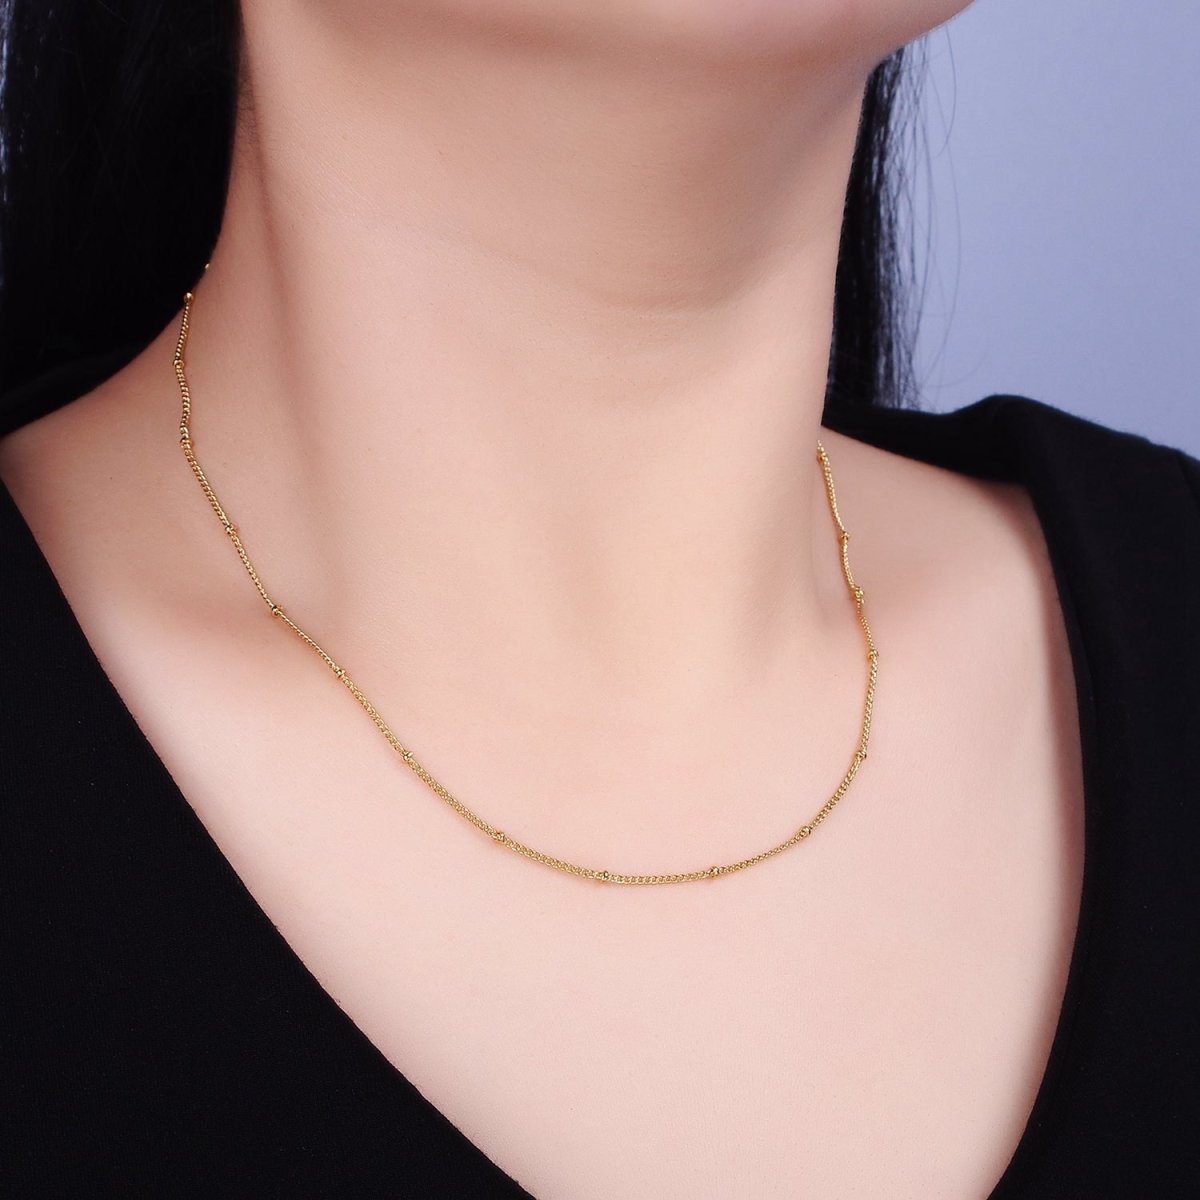 24K Gold Filled Curb Chain With Gold Beads For Wholesale Necklace Dainty Satellite Chain Jewelry Making Supplies | WA-1845 WA-1846 Clearance Pricing - DLUXCA